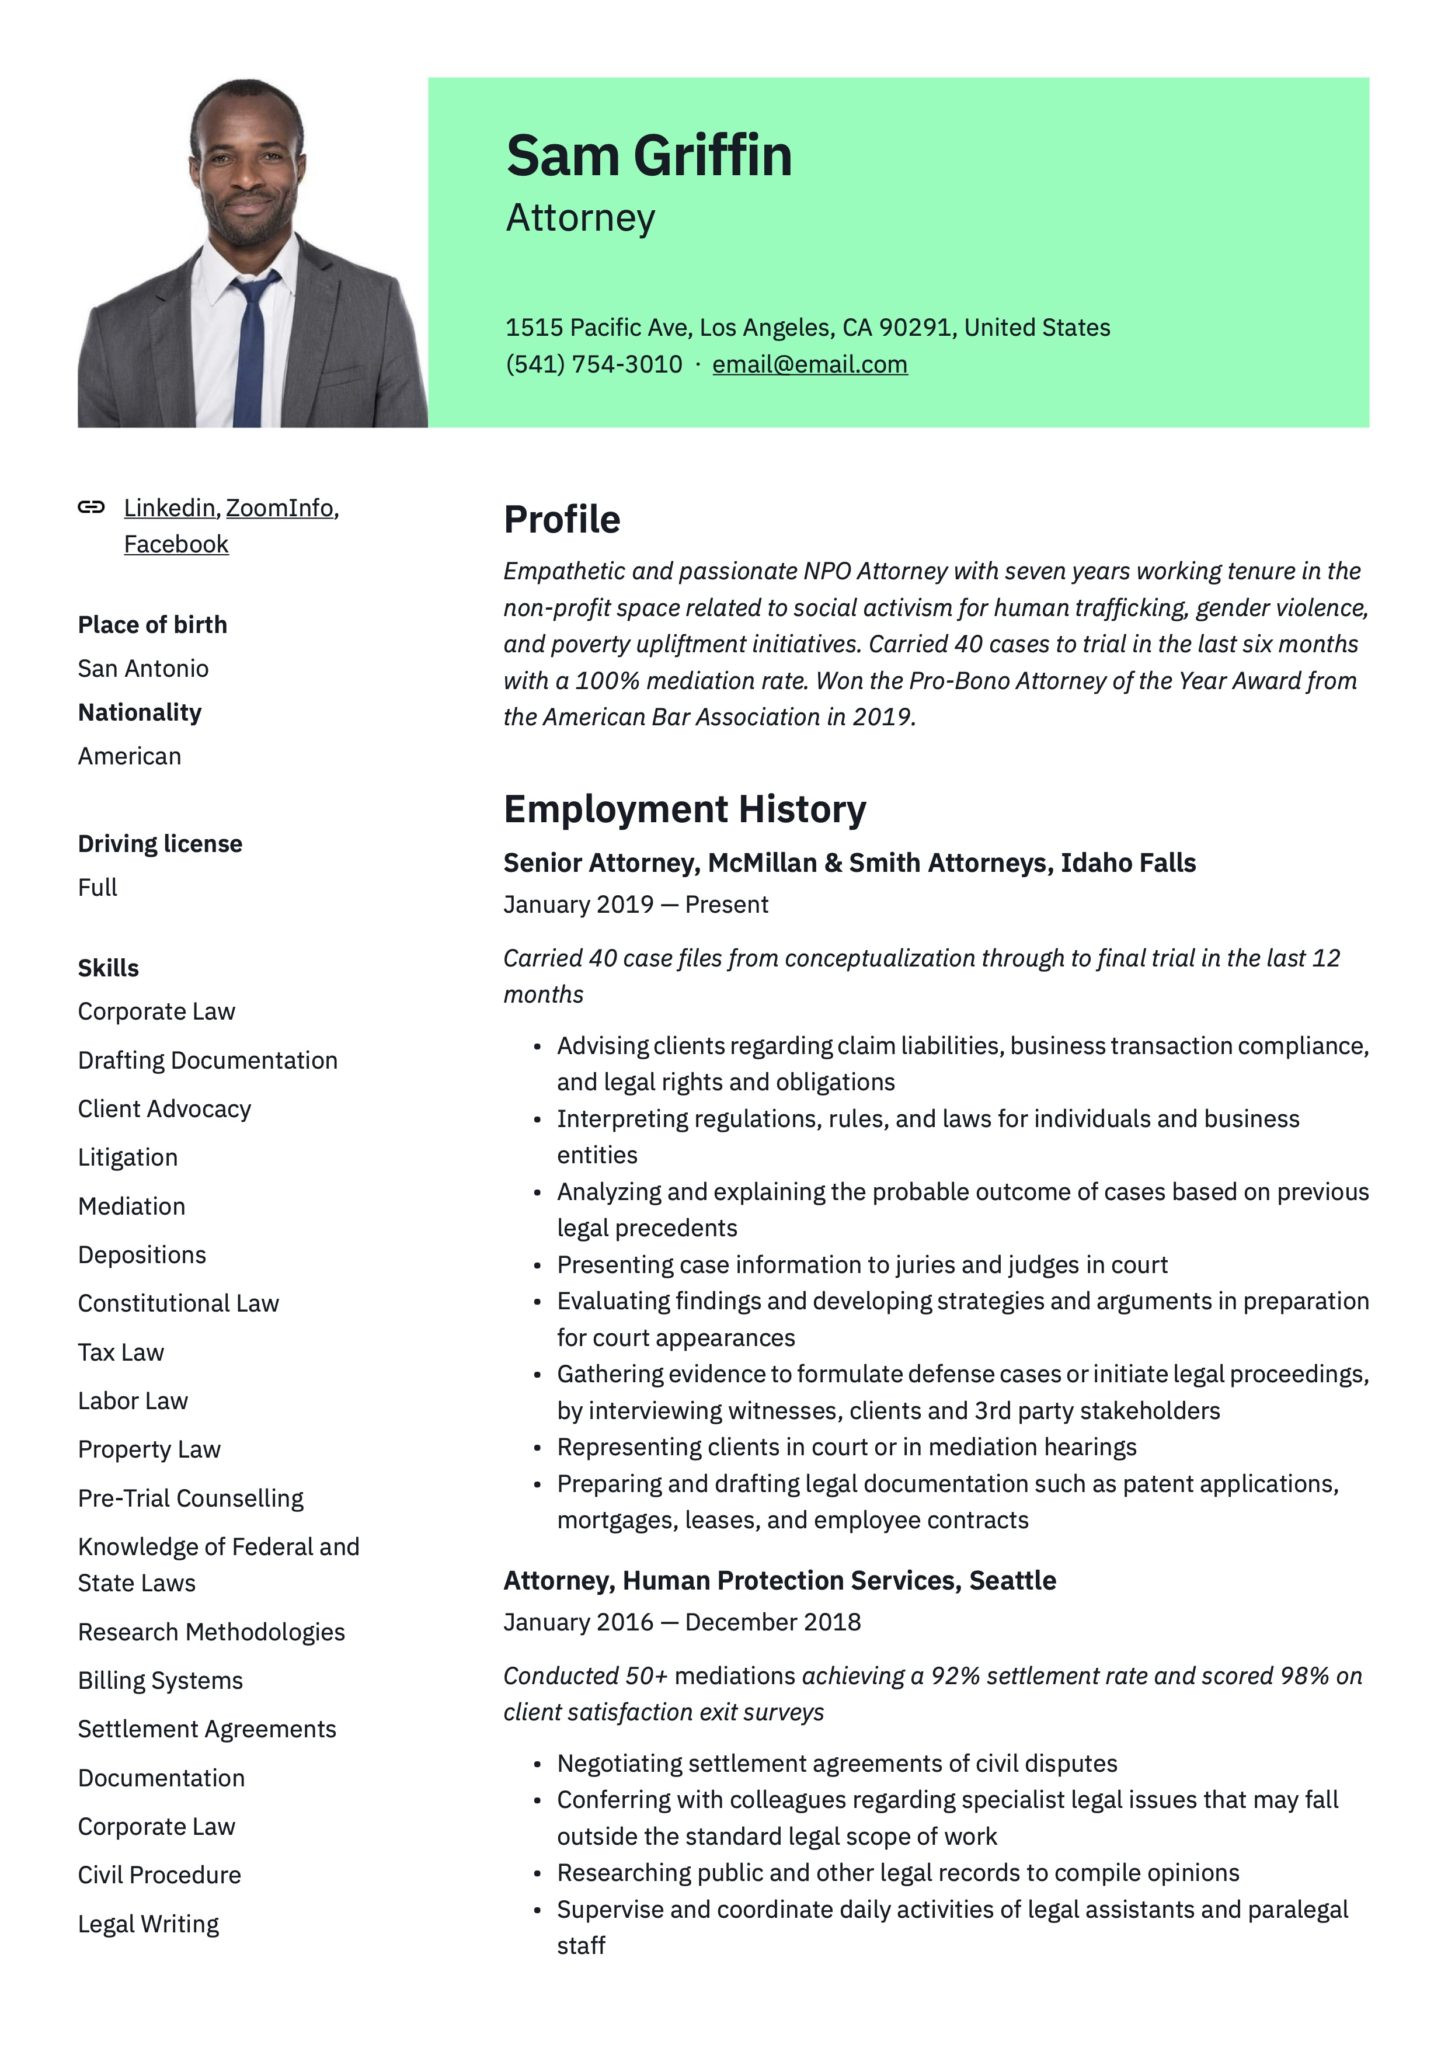 Sample Resume for Justice Court Judge 18 attorney Resume Examples & Writing Guide Templates 2022